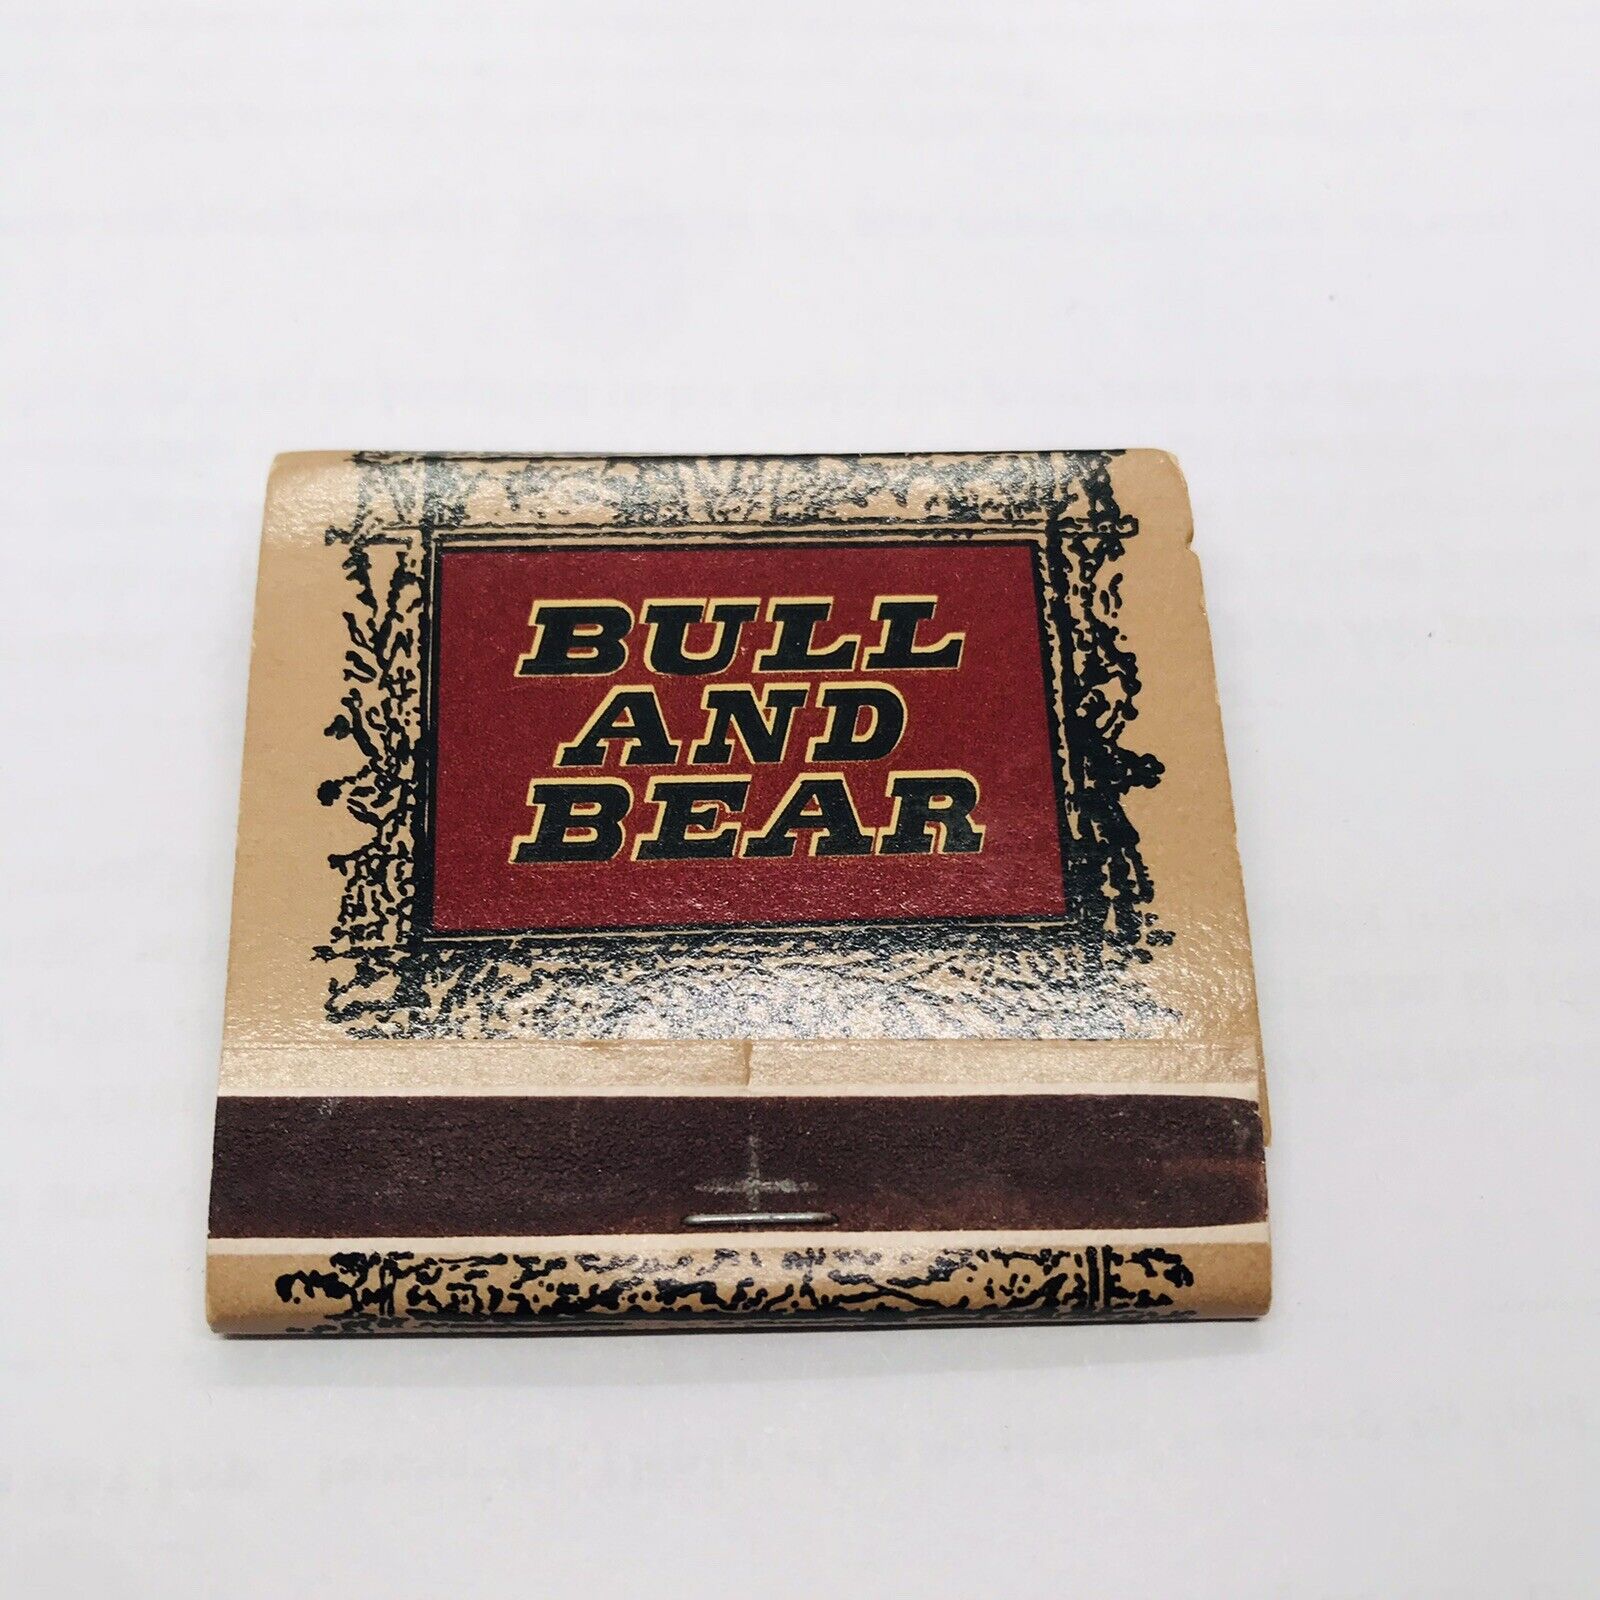 BULL AND BEAR NEW UNUSED VINTAGE HOLTON RESERVATION SERVICE MATCHBOOK